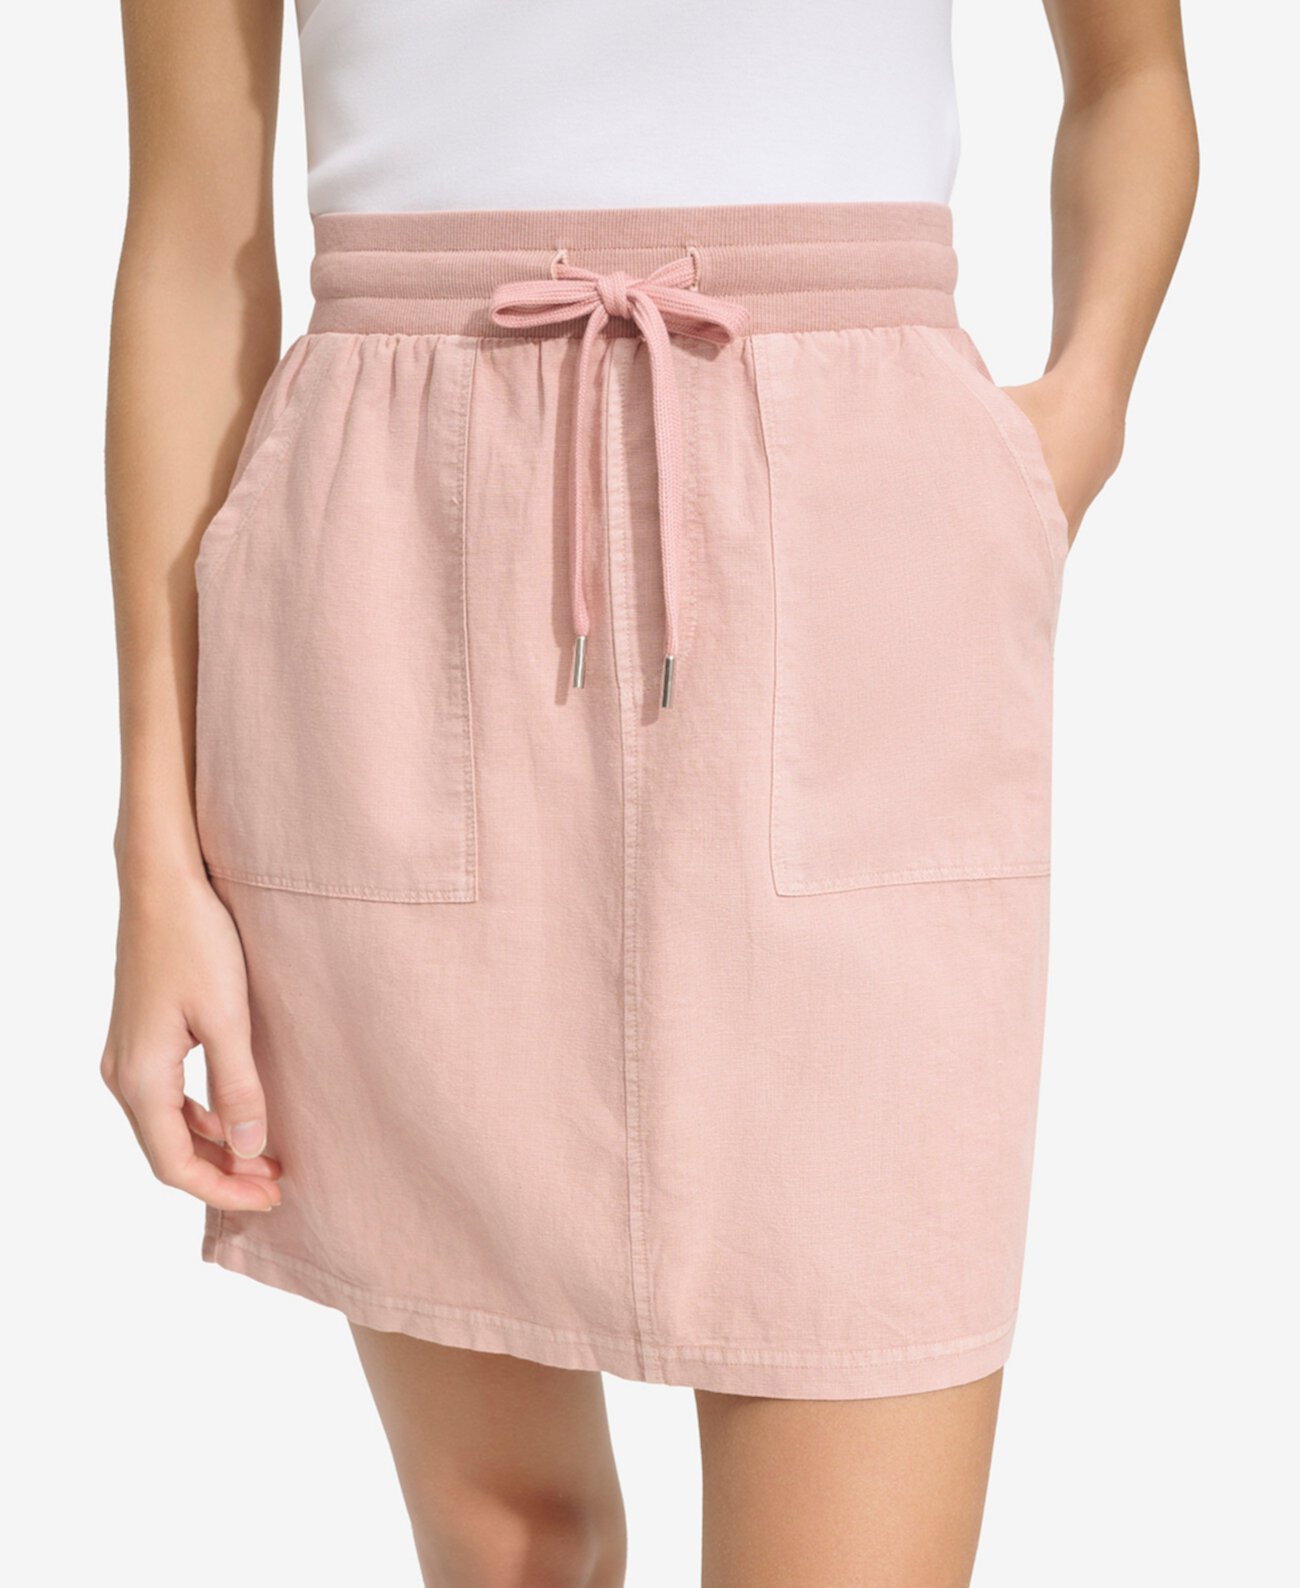 Andrew Marc New York Women's Washed Linen High Rise Skirt with Twill Side Taping Marc New York